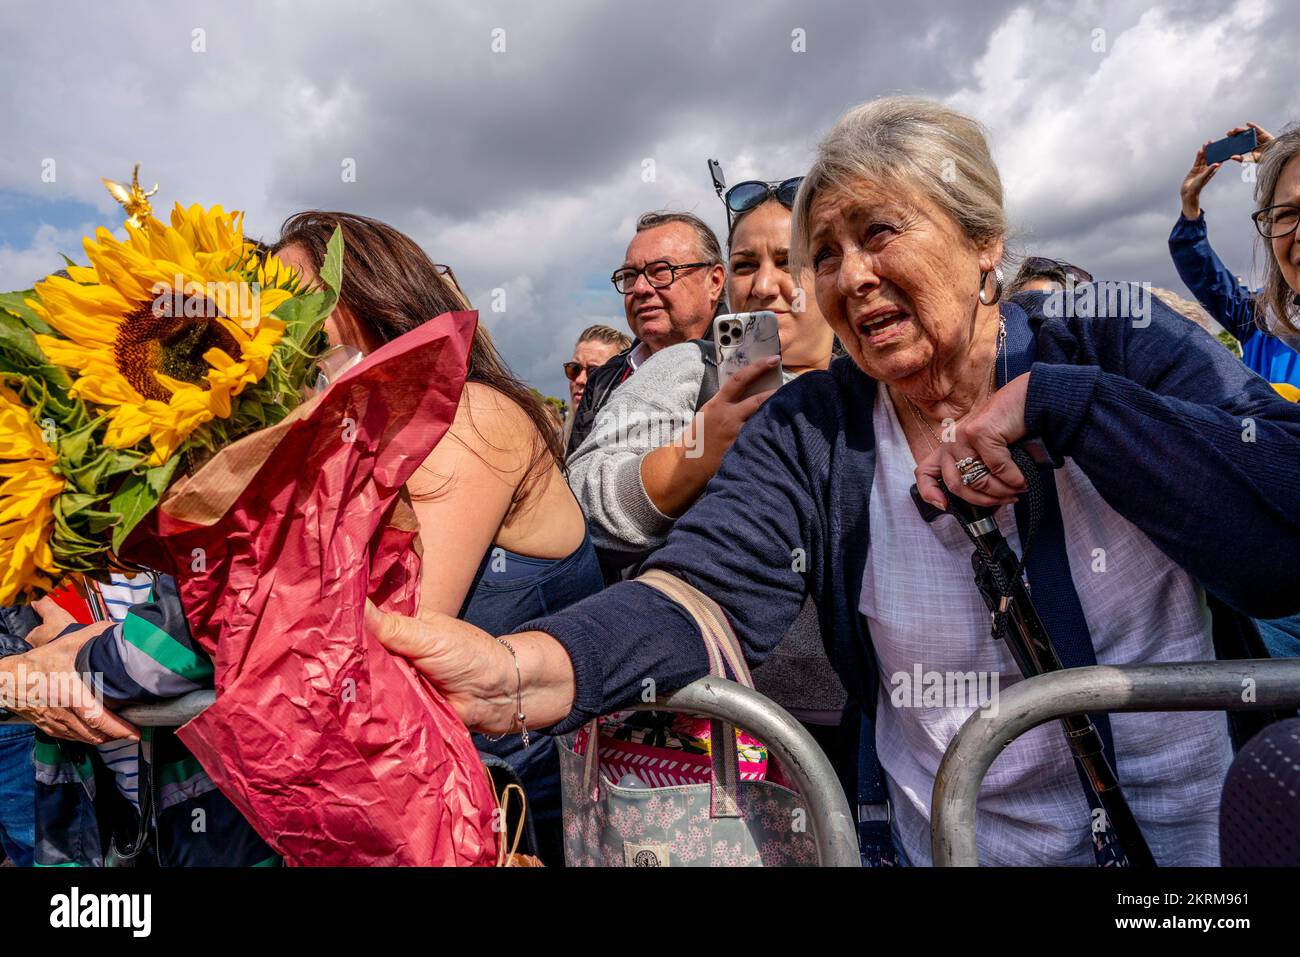 A Senior Woman Passes A Bunch Of Flowers To A Police Officer To Put Outside The Gates of Buckingham Palace Following The Death of The Queen, London,UK Stock Photo